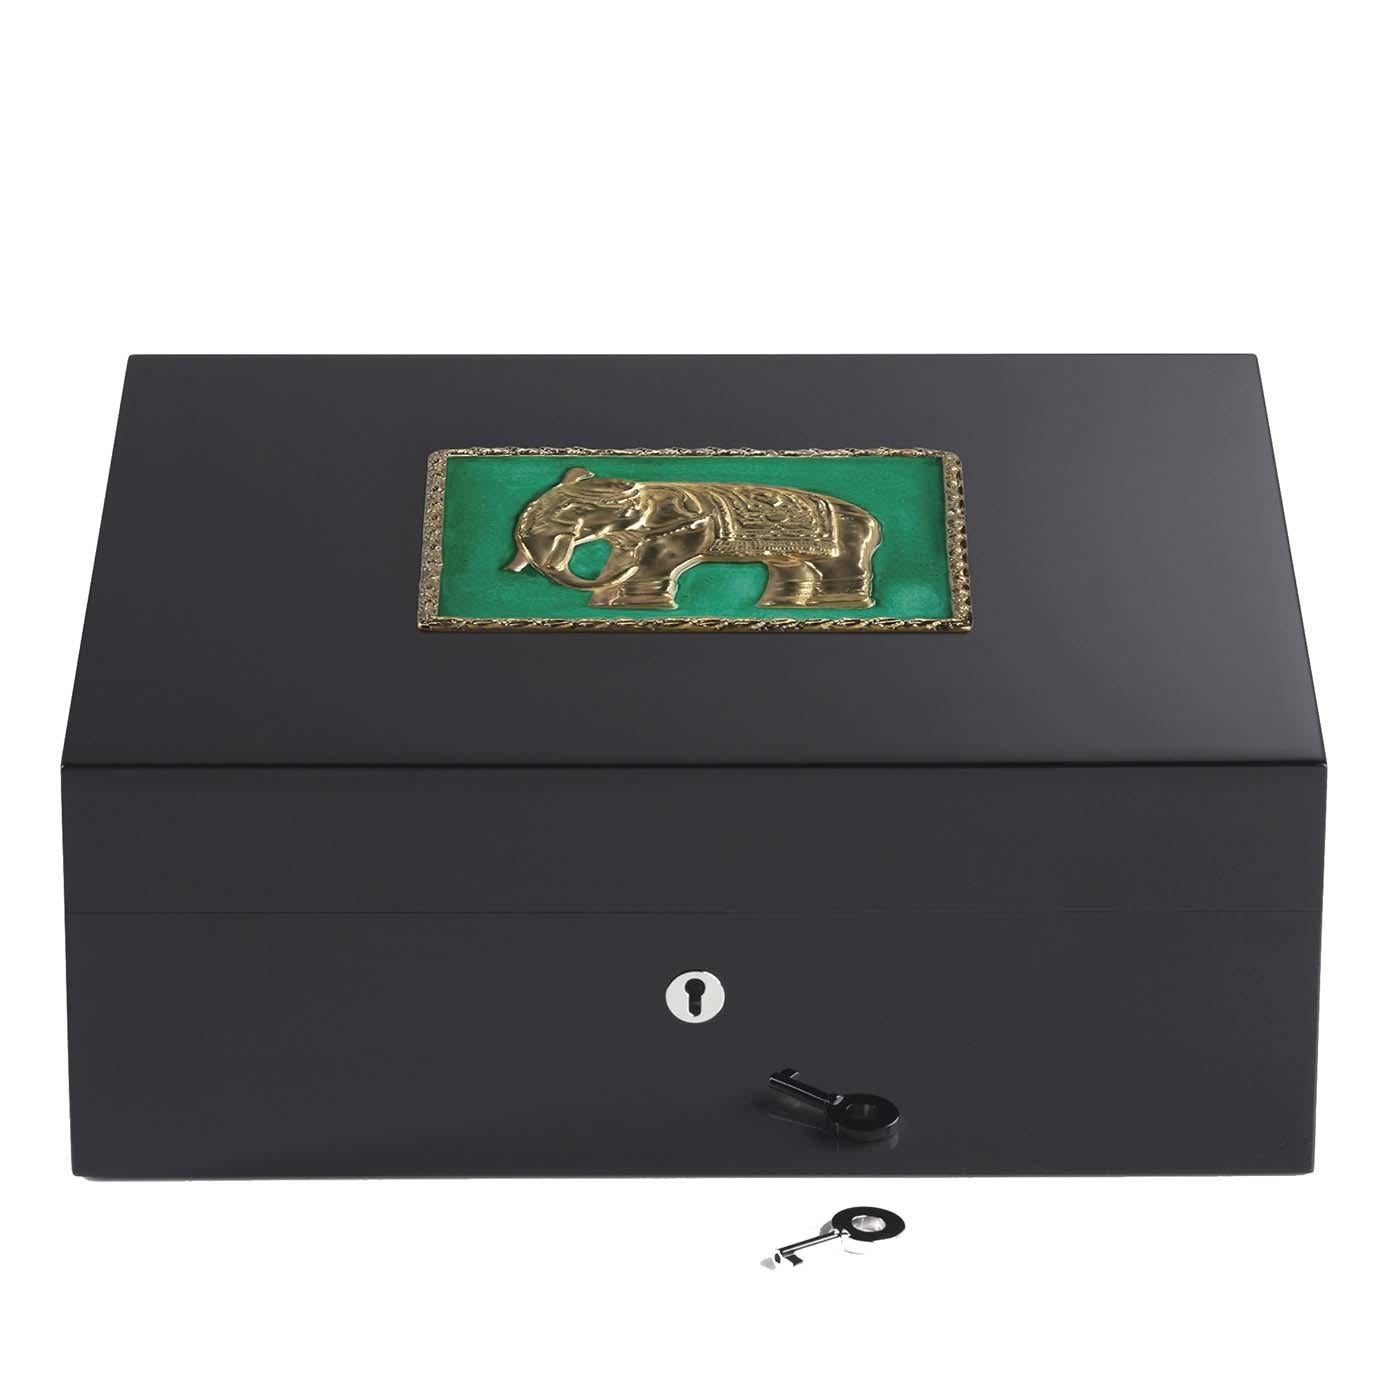 This refined humidor is an original object crafted of precious wood. Showcasing a sleek design, adorned with a symbol of the Indian culture, the elephant. The square decoration features golden edges that match the central reproduction of the